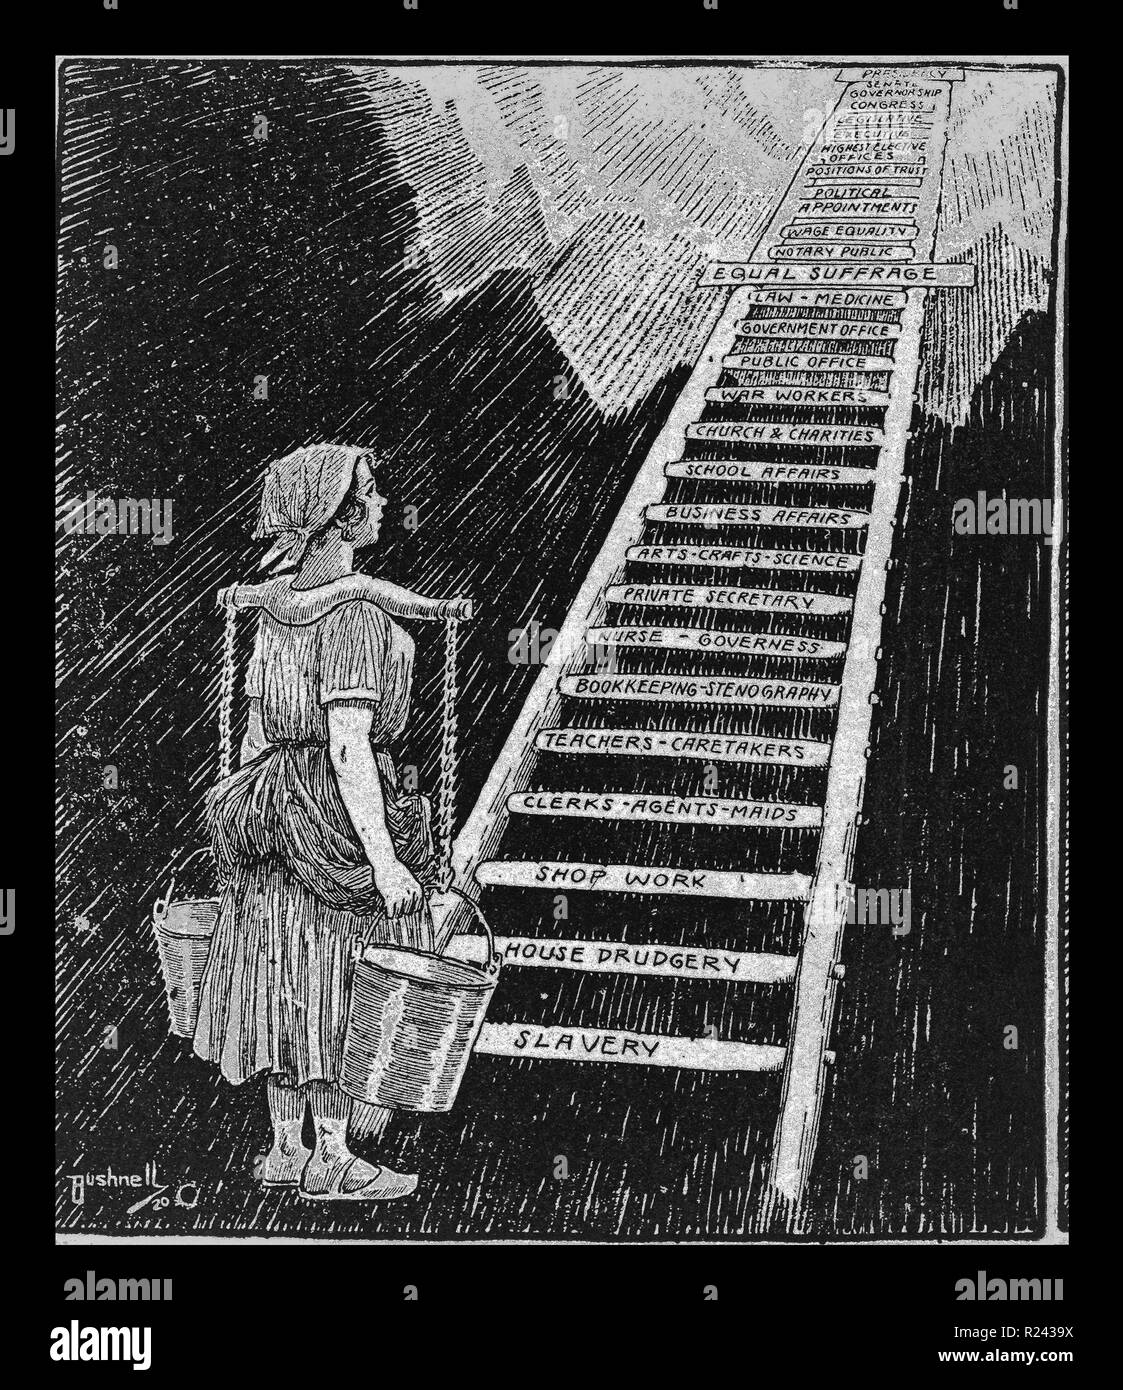 American cartoon of 1920. The sky is now her limit. Cartoon showing a woman carrying buckets on a yoke, looking up at ladder ascending up to the sky, bottom rungs labelled 'Slavery,' 'House Drudgery,' and 'Shop Work.' Top rungs labelled 'Equal Suffrage,' 'Wage Equity,' and 'Presidency.' 1920 Stock Photo